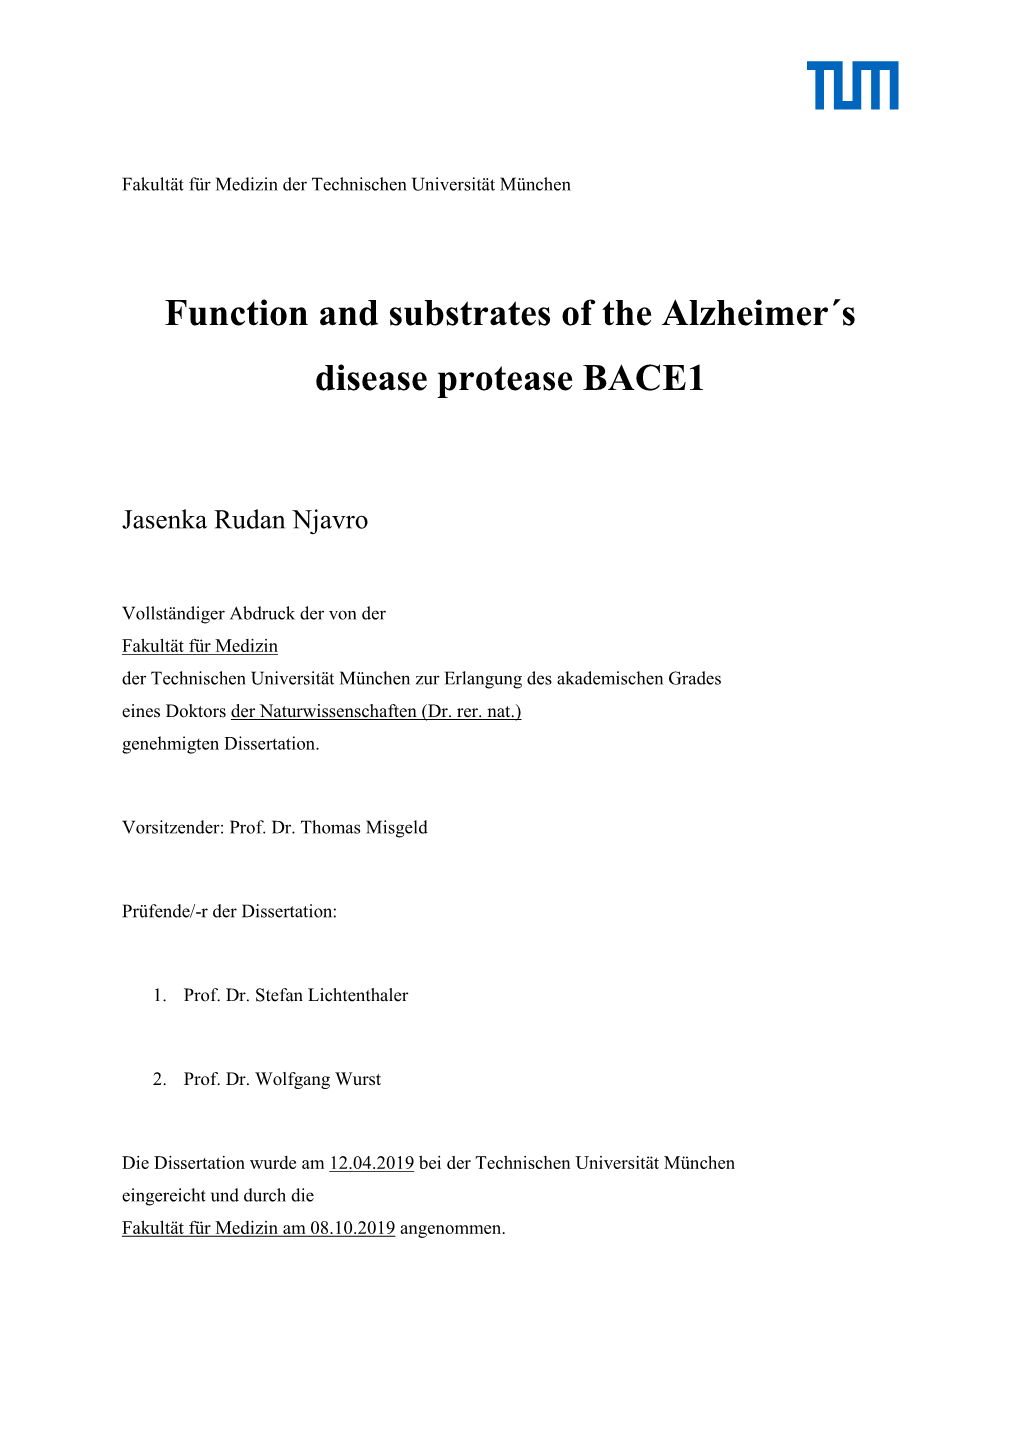 Function and Substrates of the Alzheimer´S Disease Protease BACE1